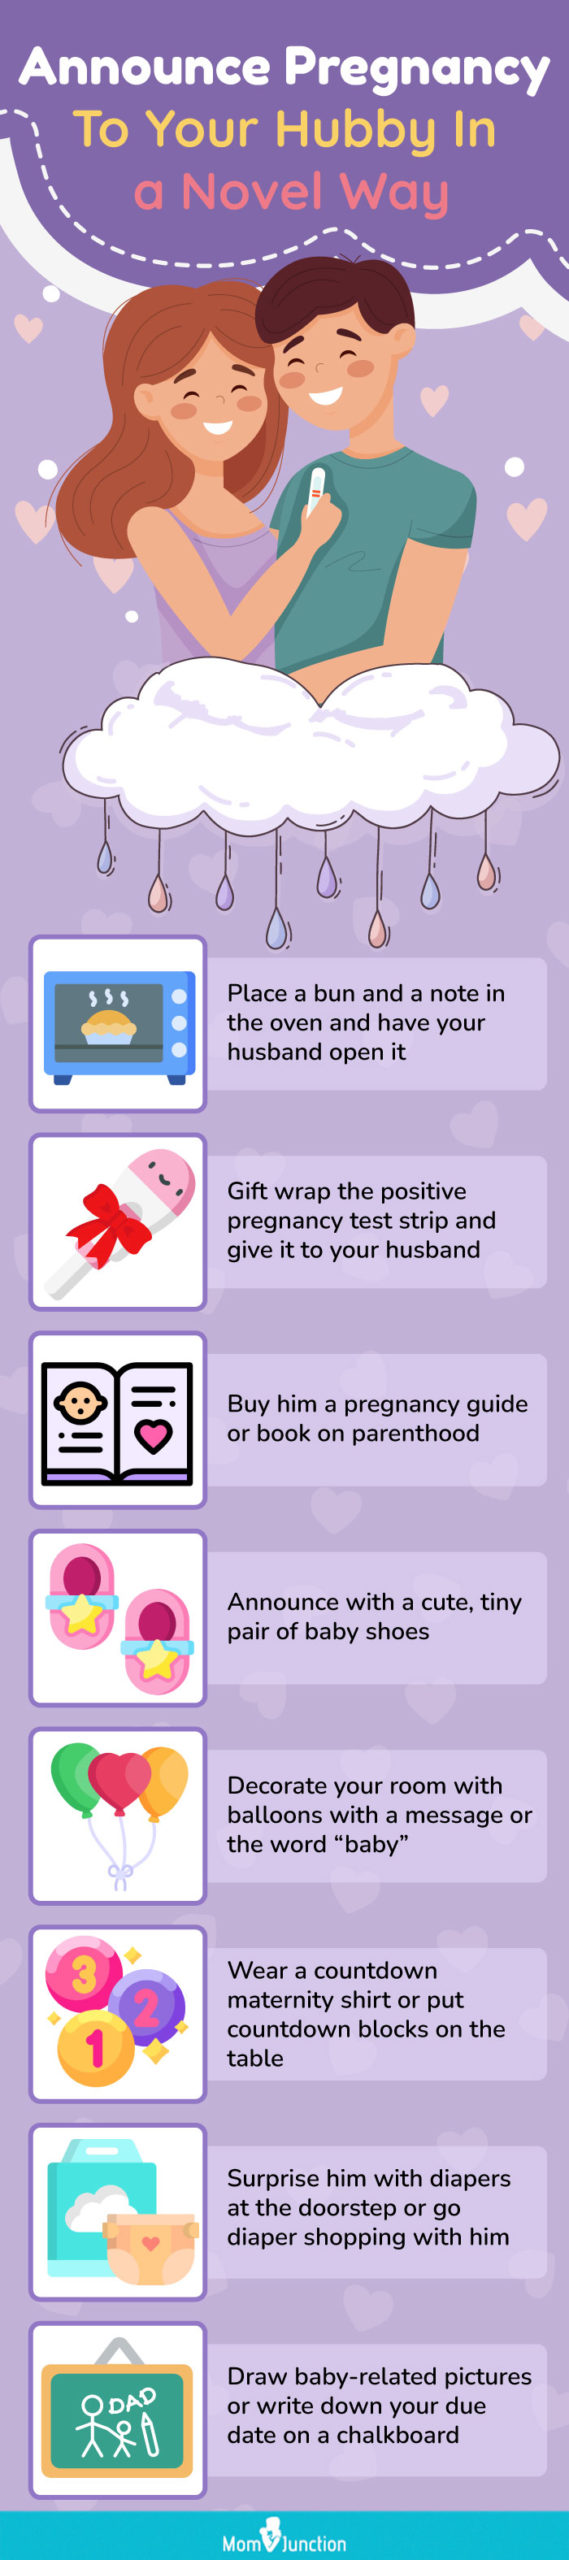 announce pregnancy to your hubby in a novel way [infographic]